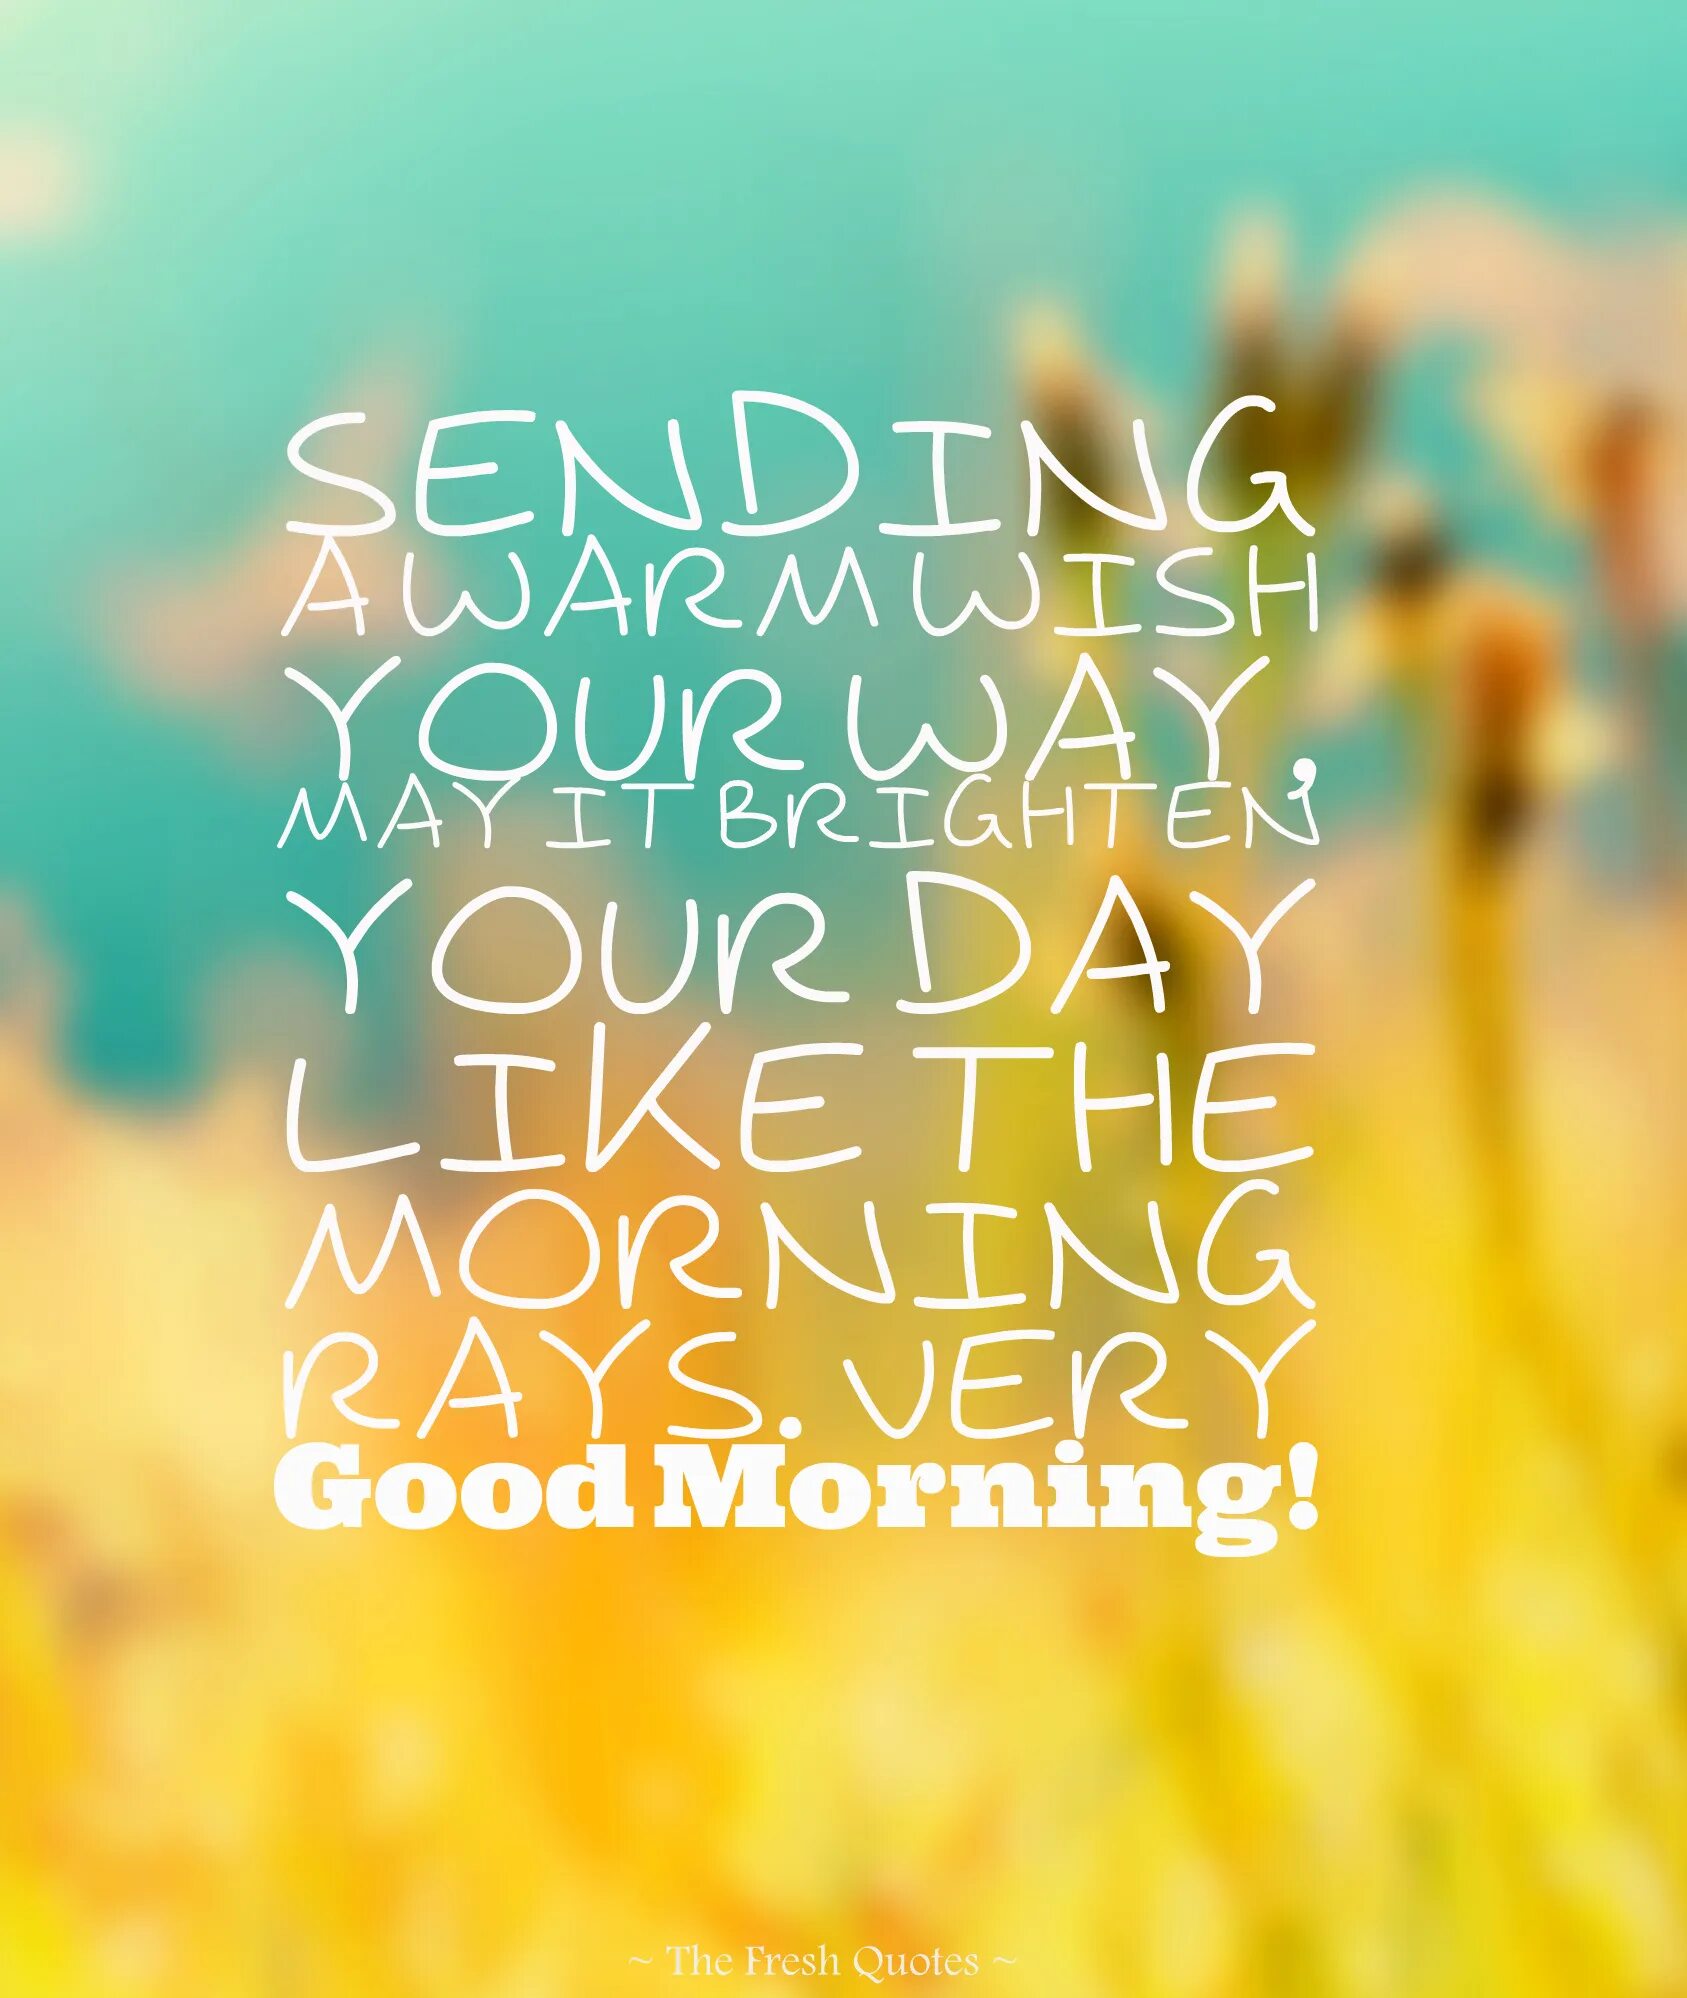 Good morning Wishes. Good morning quotes. Wishing good morning. Good morning positive. Send wish